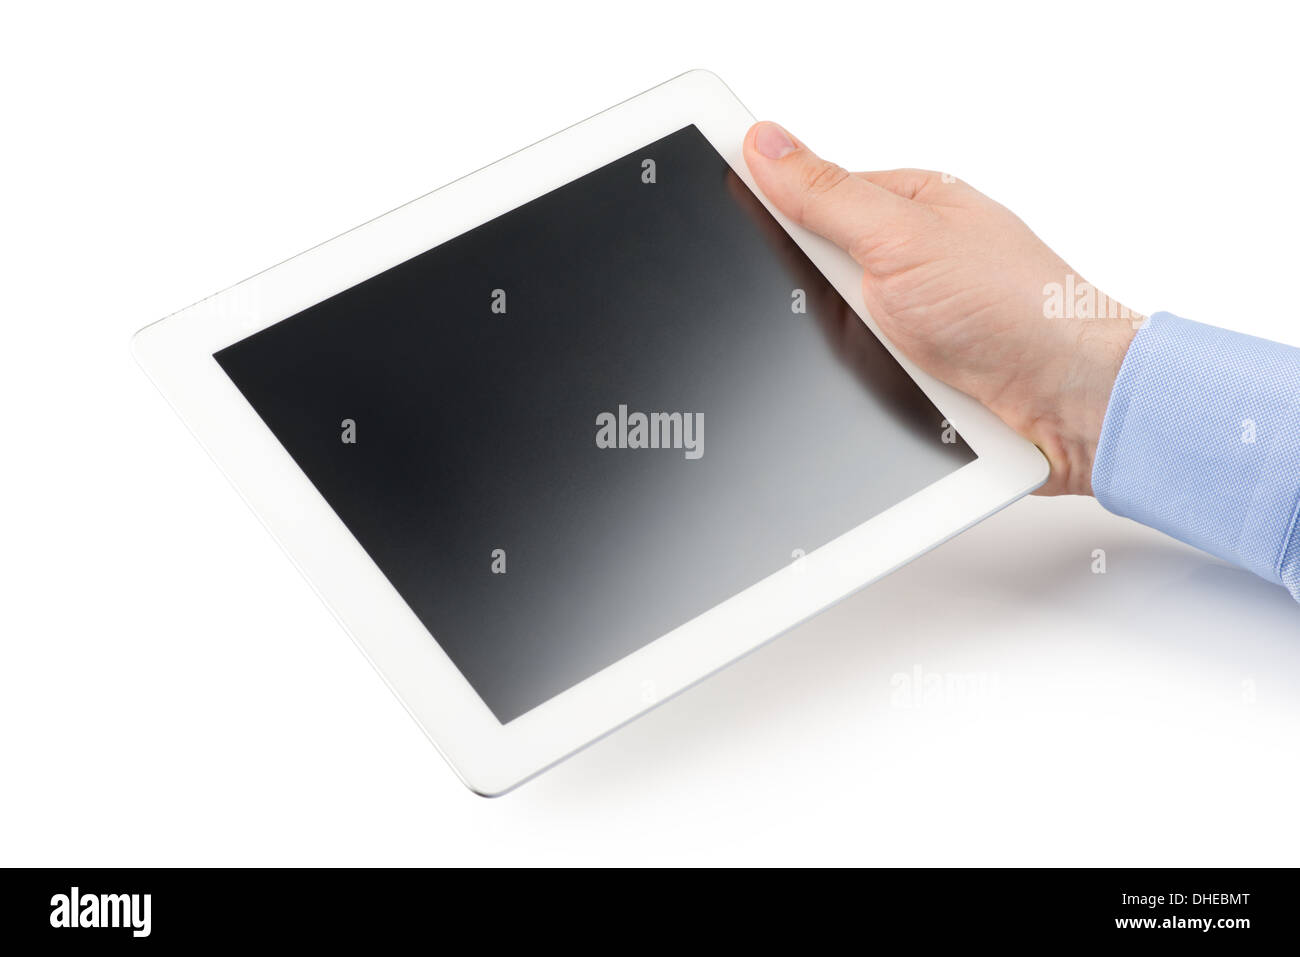 Man's right hand holding a tablet computer on a white background. Stock Photo